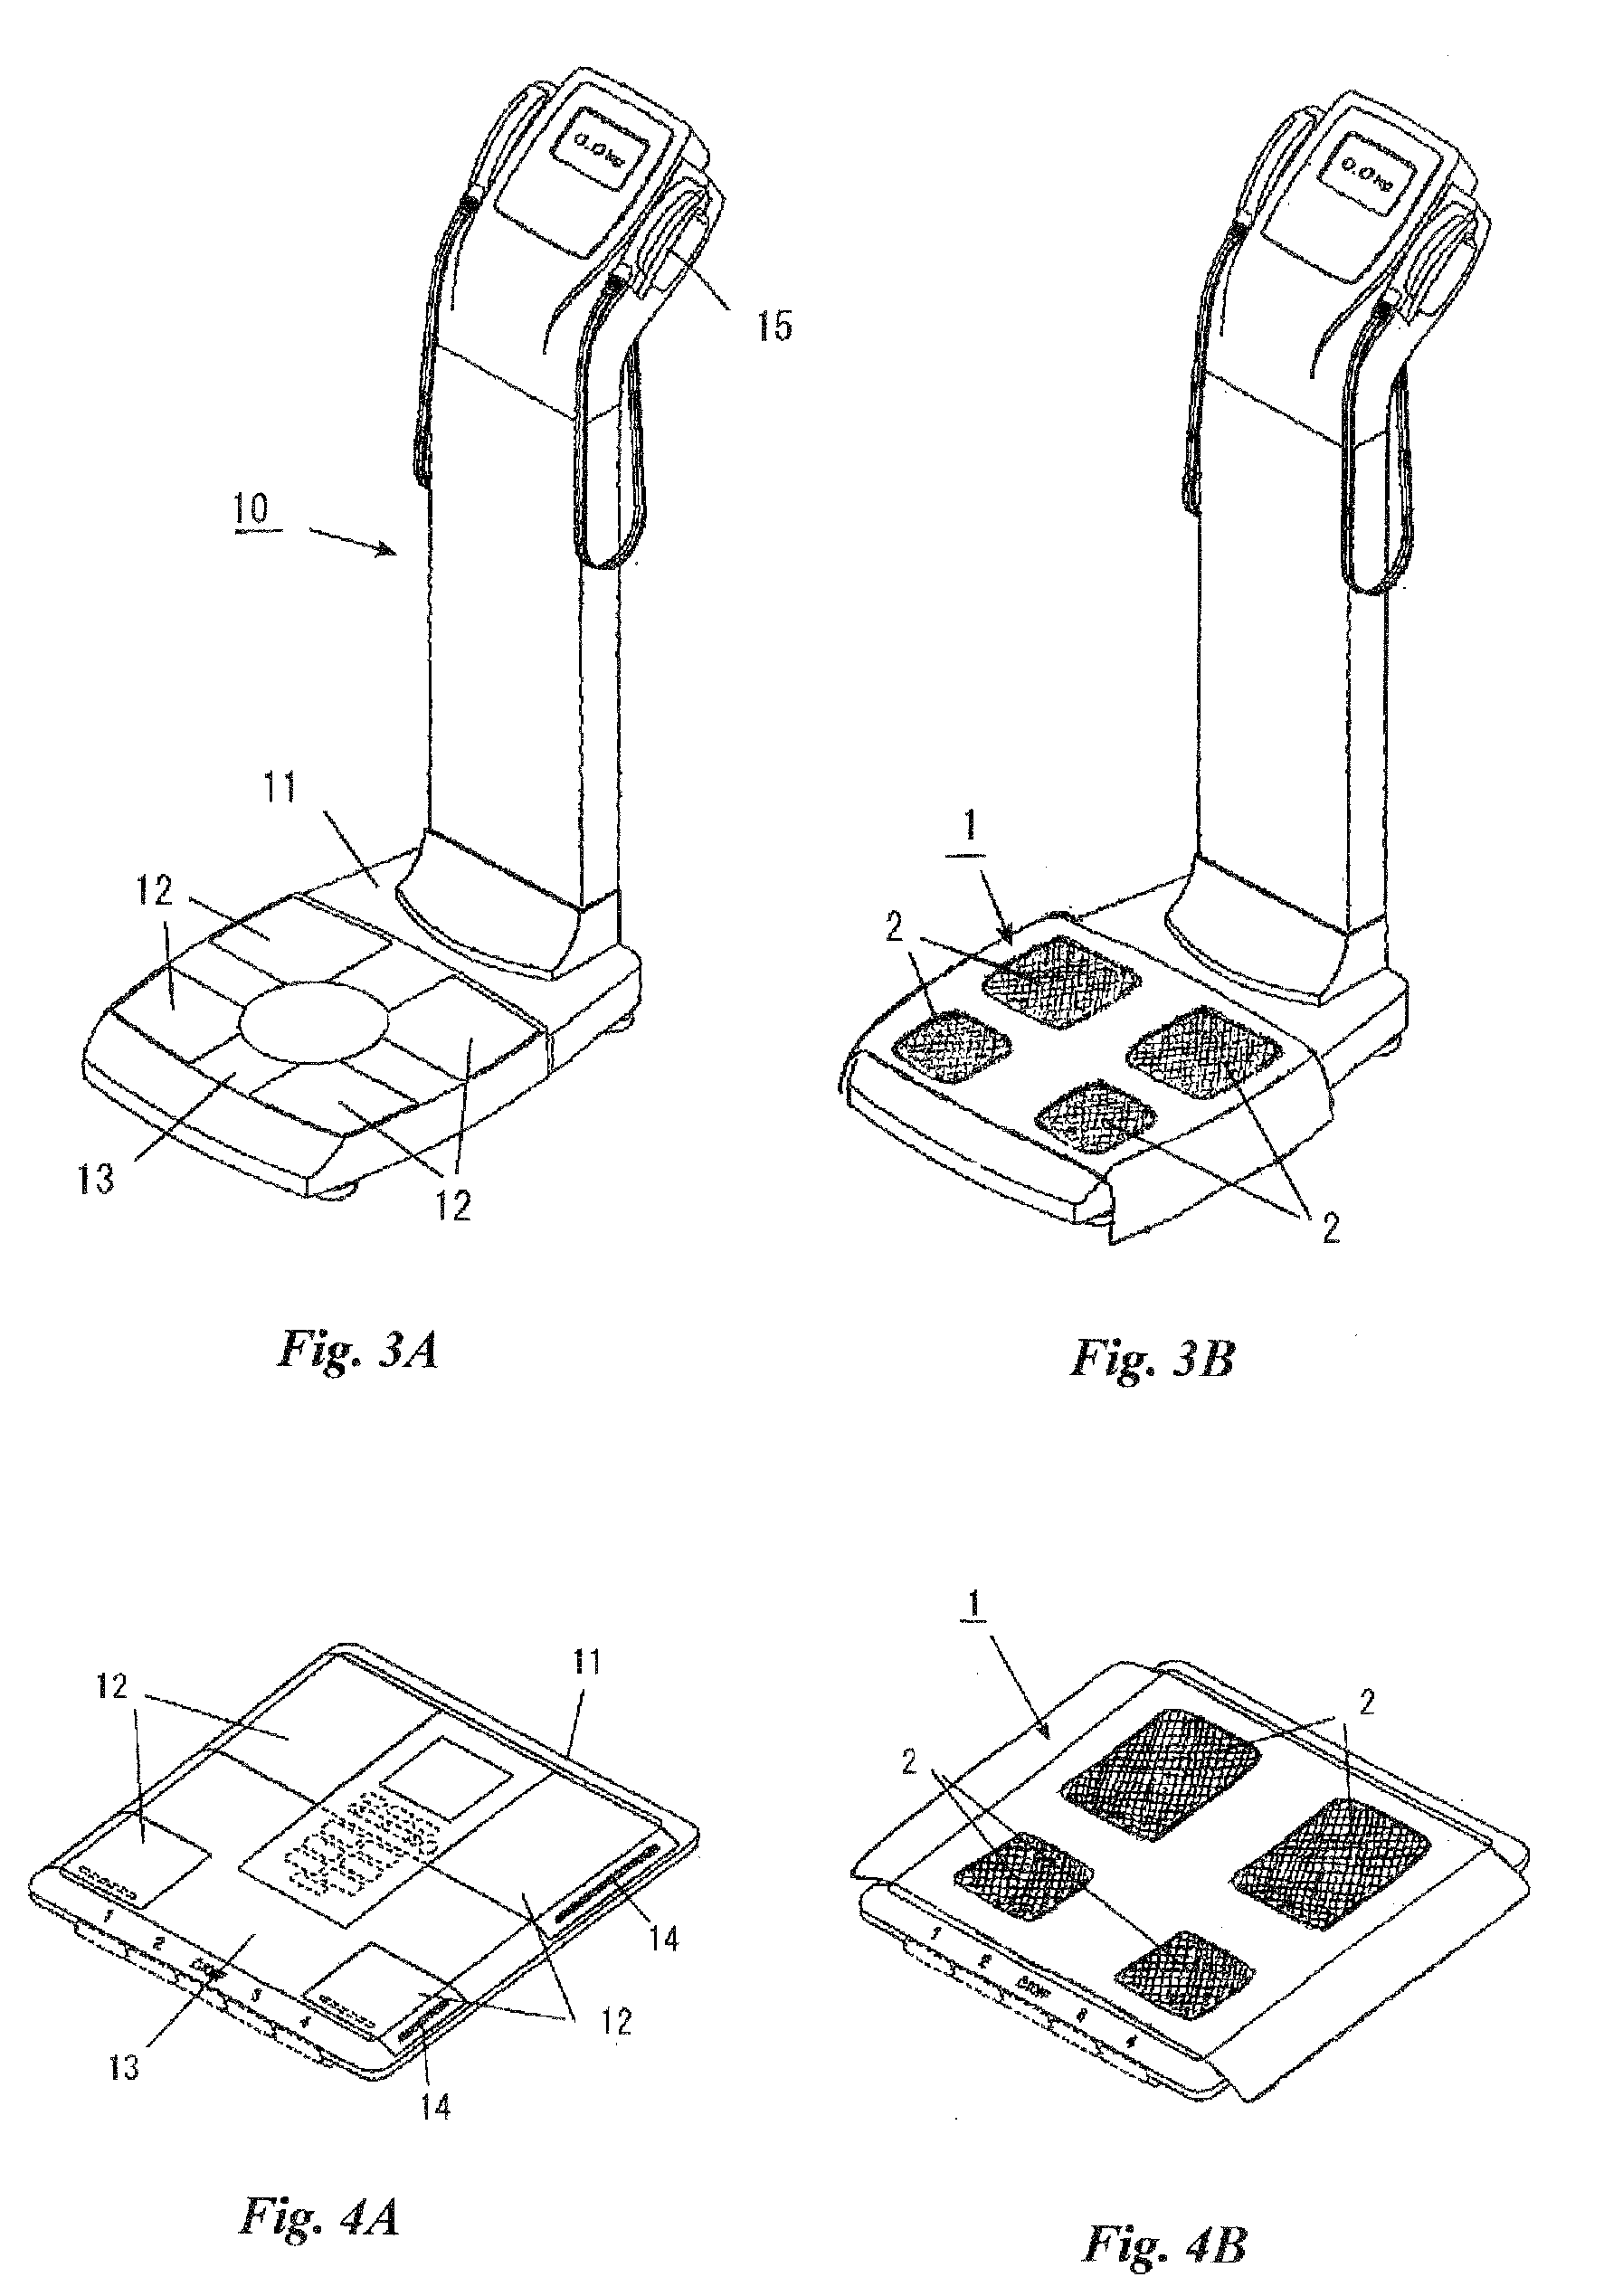 Cover sheet for a body measuring apparatus and an automatic sheet dispenser therefor